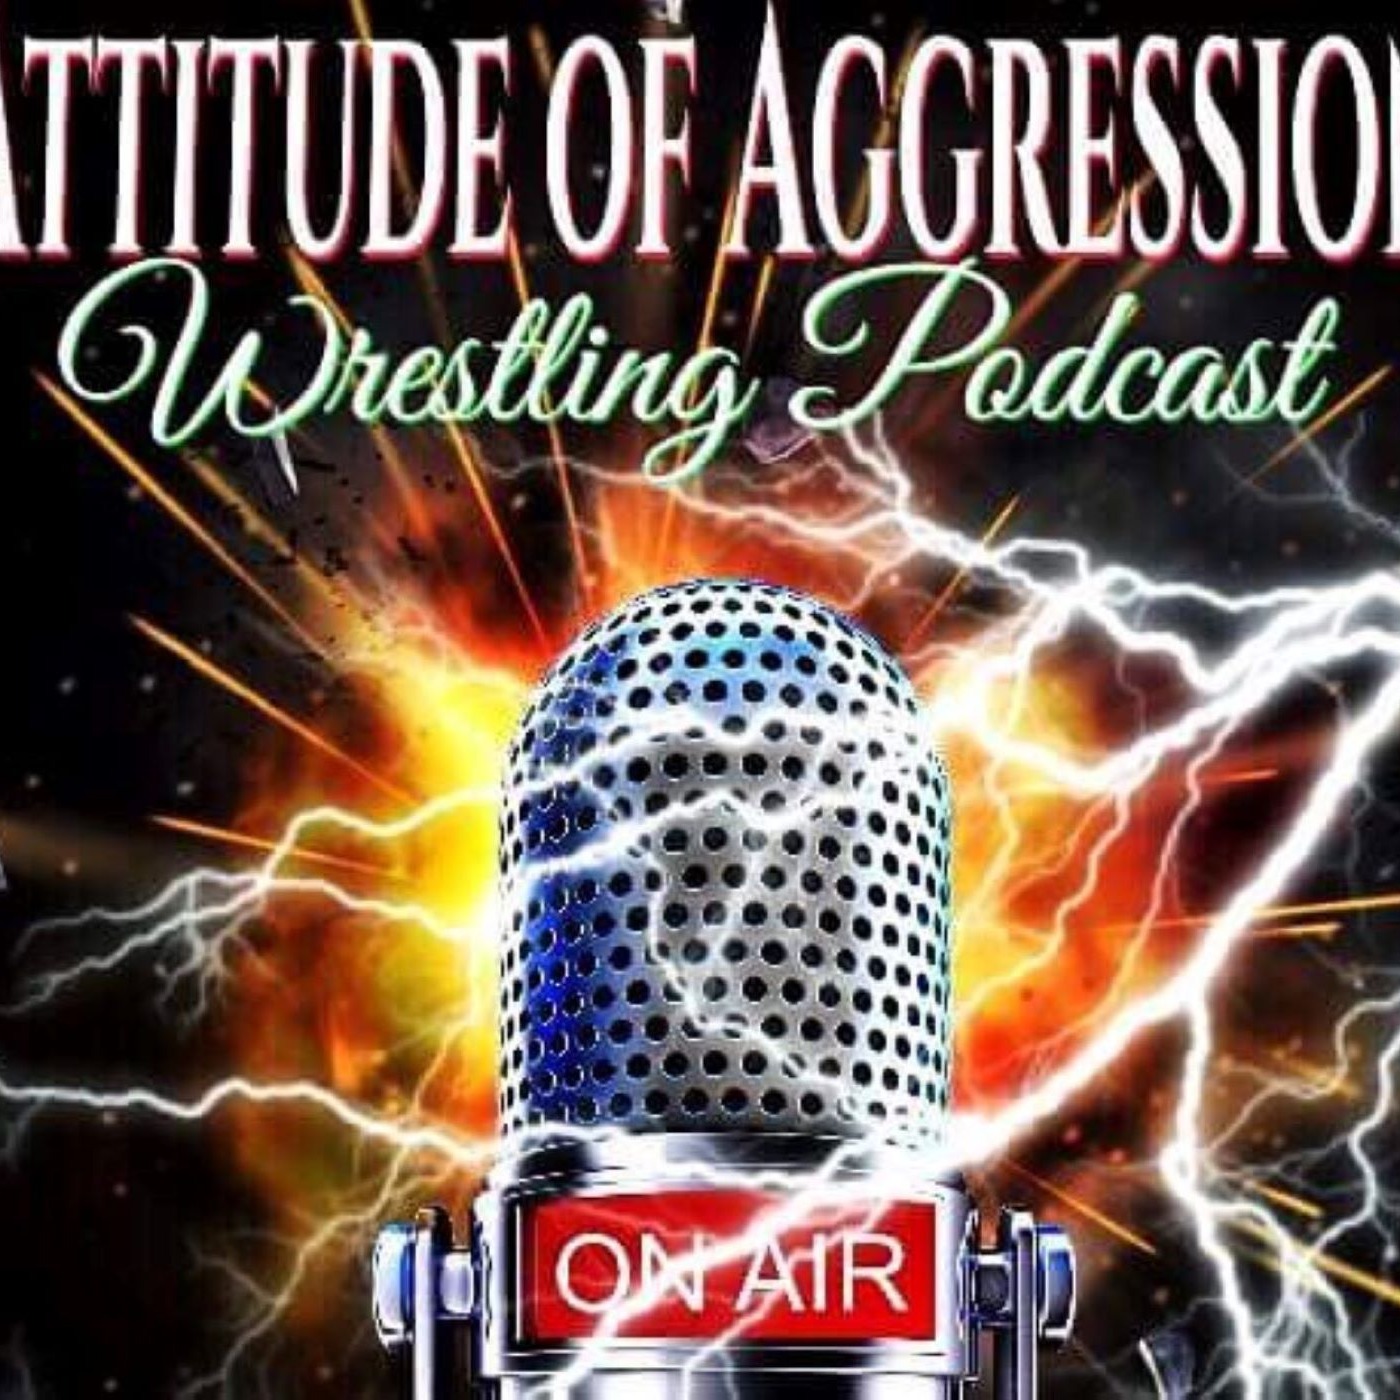 Attitude Of Aggression #285- The Big Four Project Chapter 10: Summer Slam '91 & Survivor Series '91